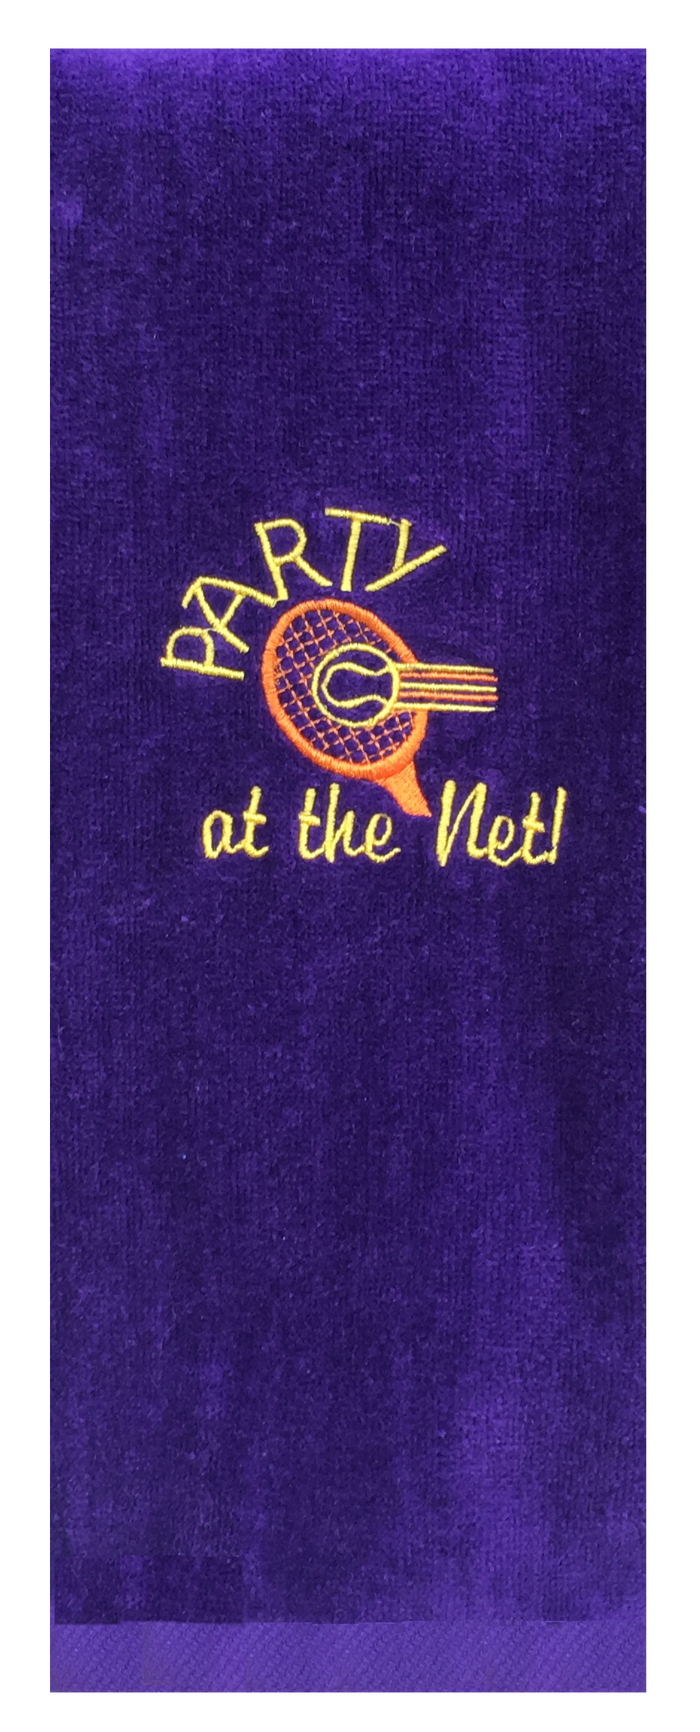 Tennis Towel - Party at the net